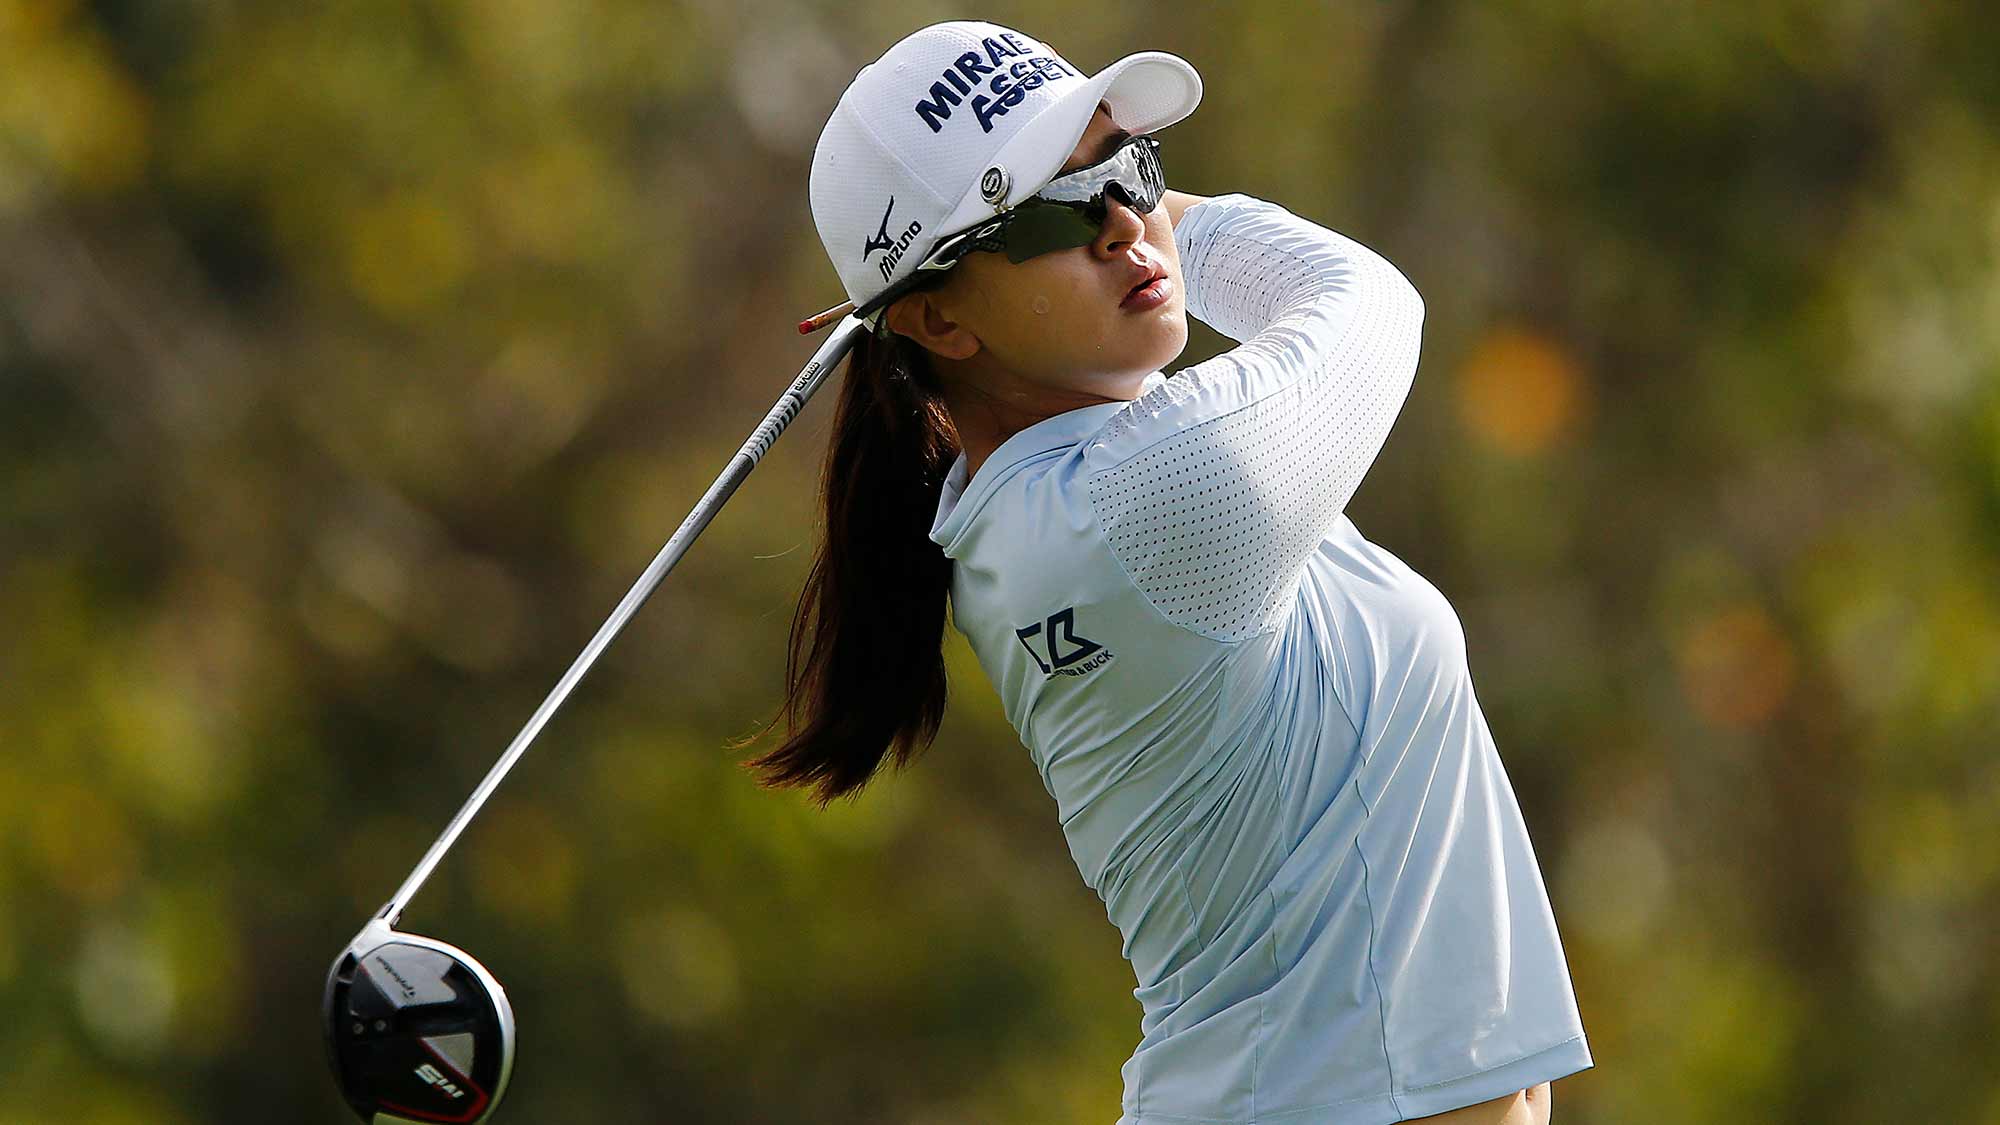 Sei Young Kim of South Korea plays her shot from the seventh tee during the third round of the Diamond Resorts Tournament of Champions at Tranquilo Golf Course at Four Seasons Golf and Sports Club Orlando on January 18, 2020 in Lake Buena Vista, Florida